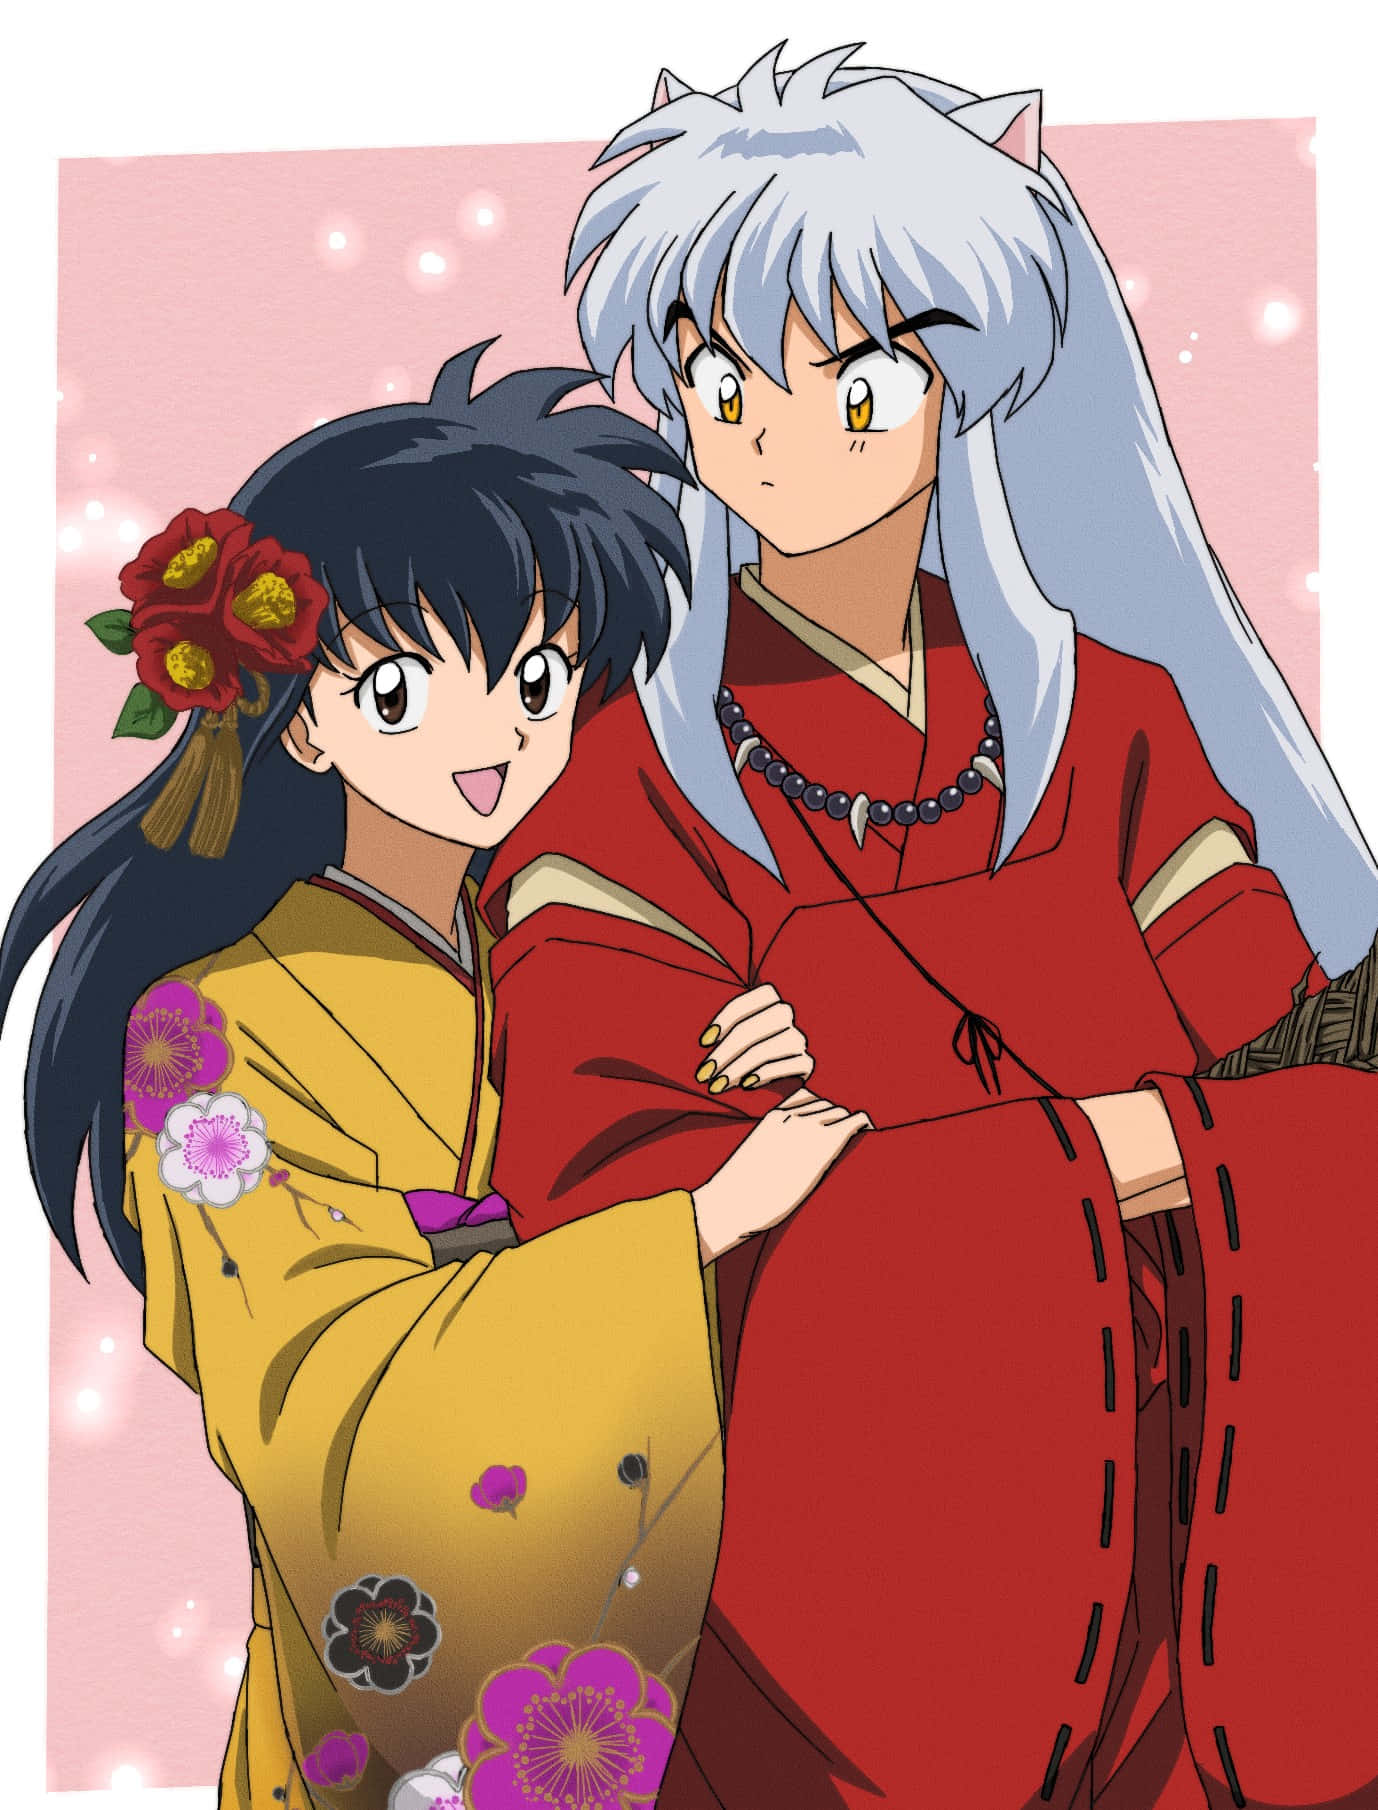 Inuyasha and Kagome embracing each other in the world of Feudal Japan Wallpaper